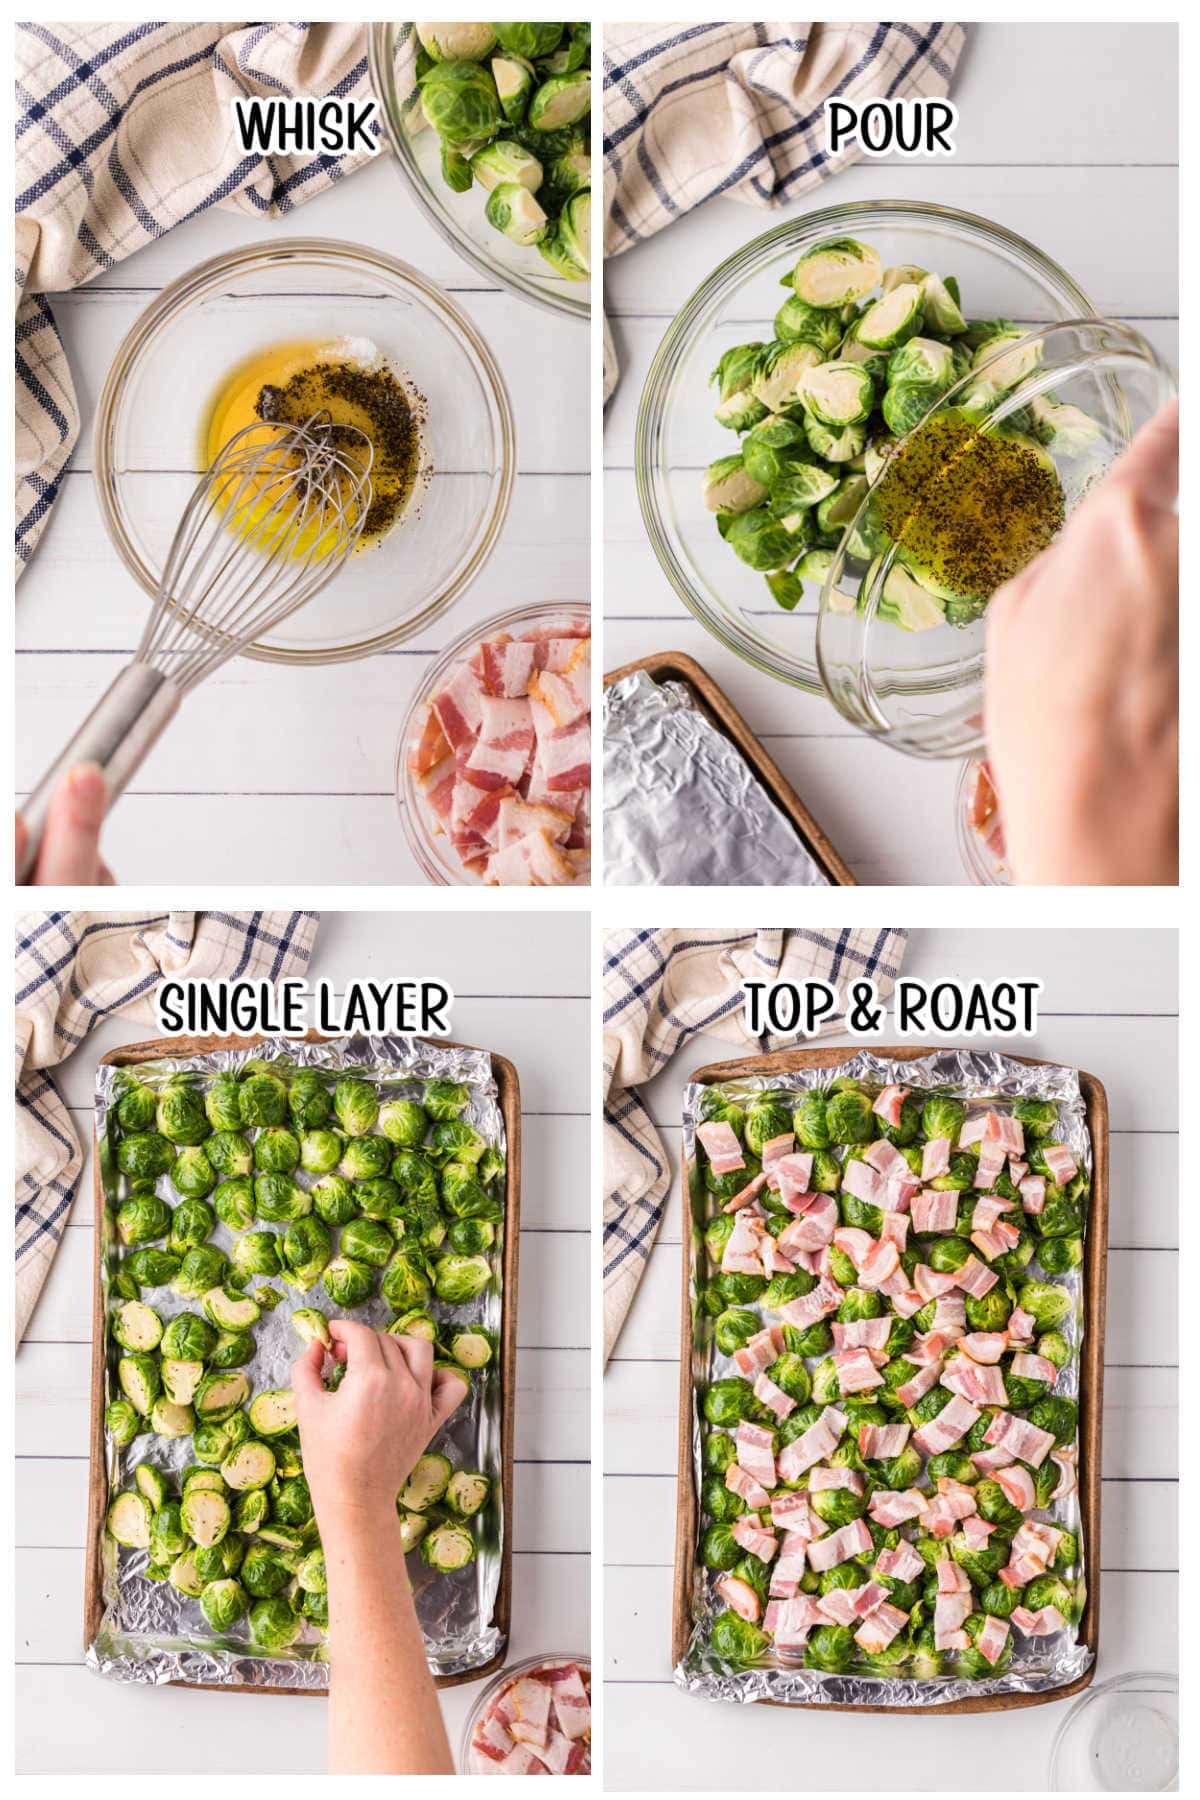 Four overhead images with text overlay showing the steps to prepare bacon Brussels sprouts, including whisking the dressing in a bowl, pouring it over the Brussels sprouts, spreading the sprouts on a baking sheet, and topping them with bacon. 